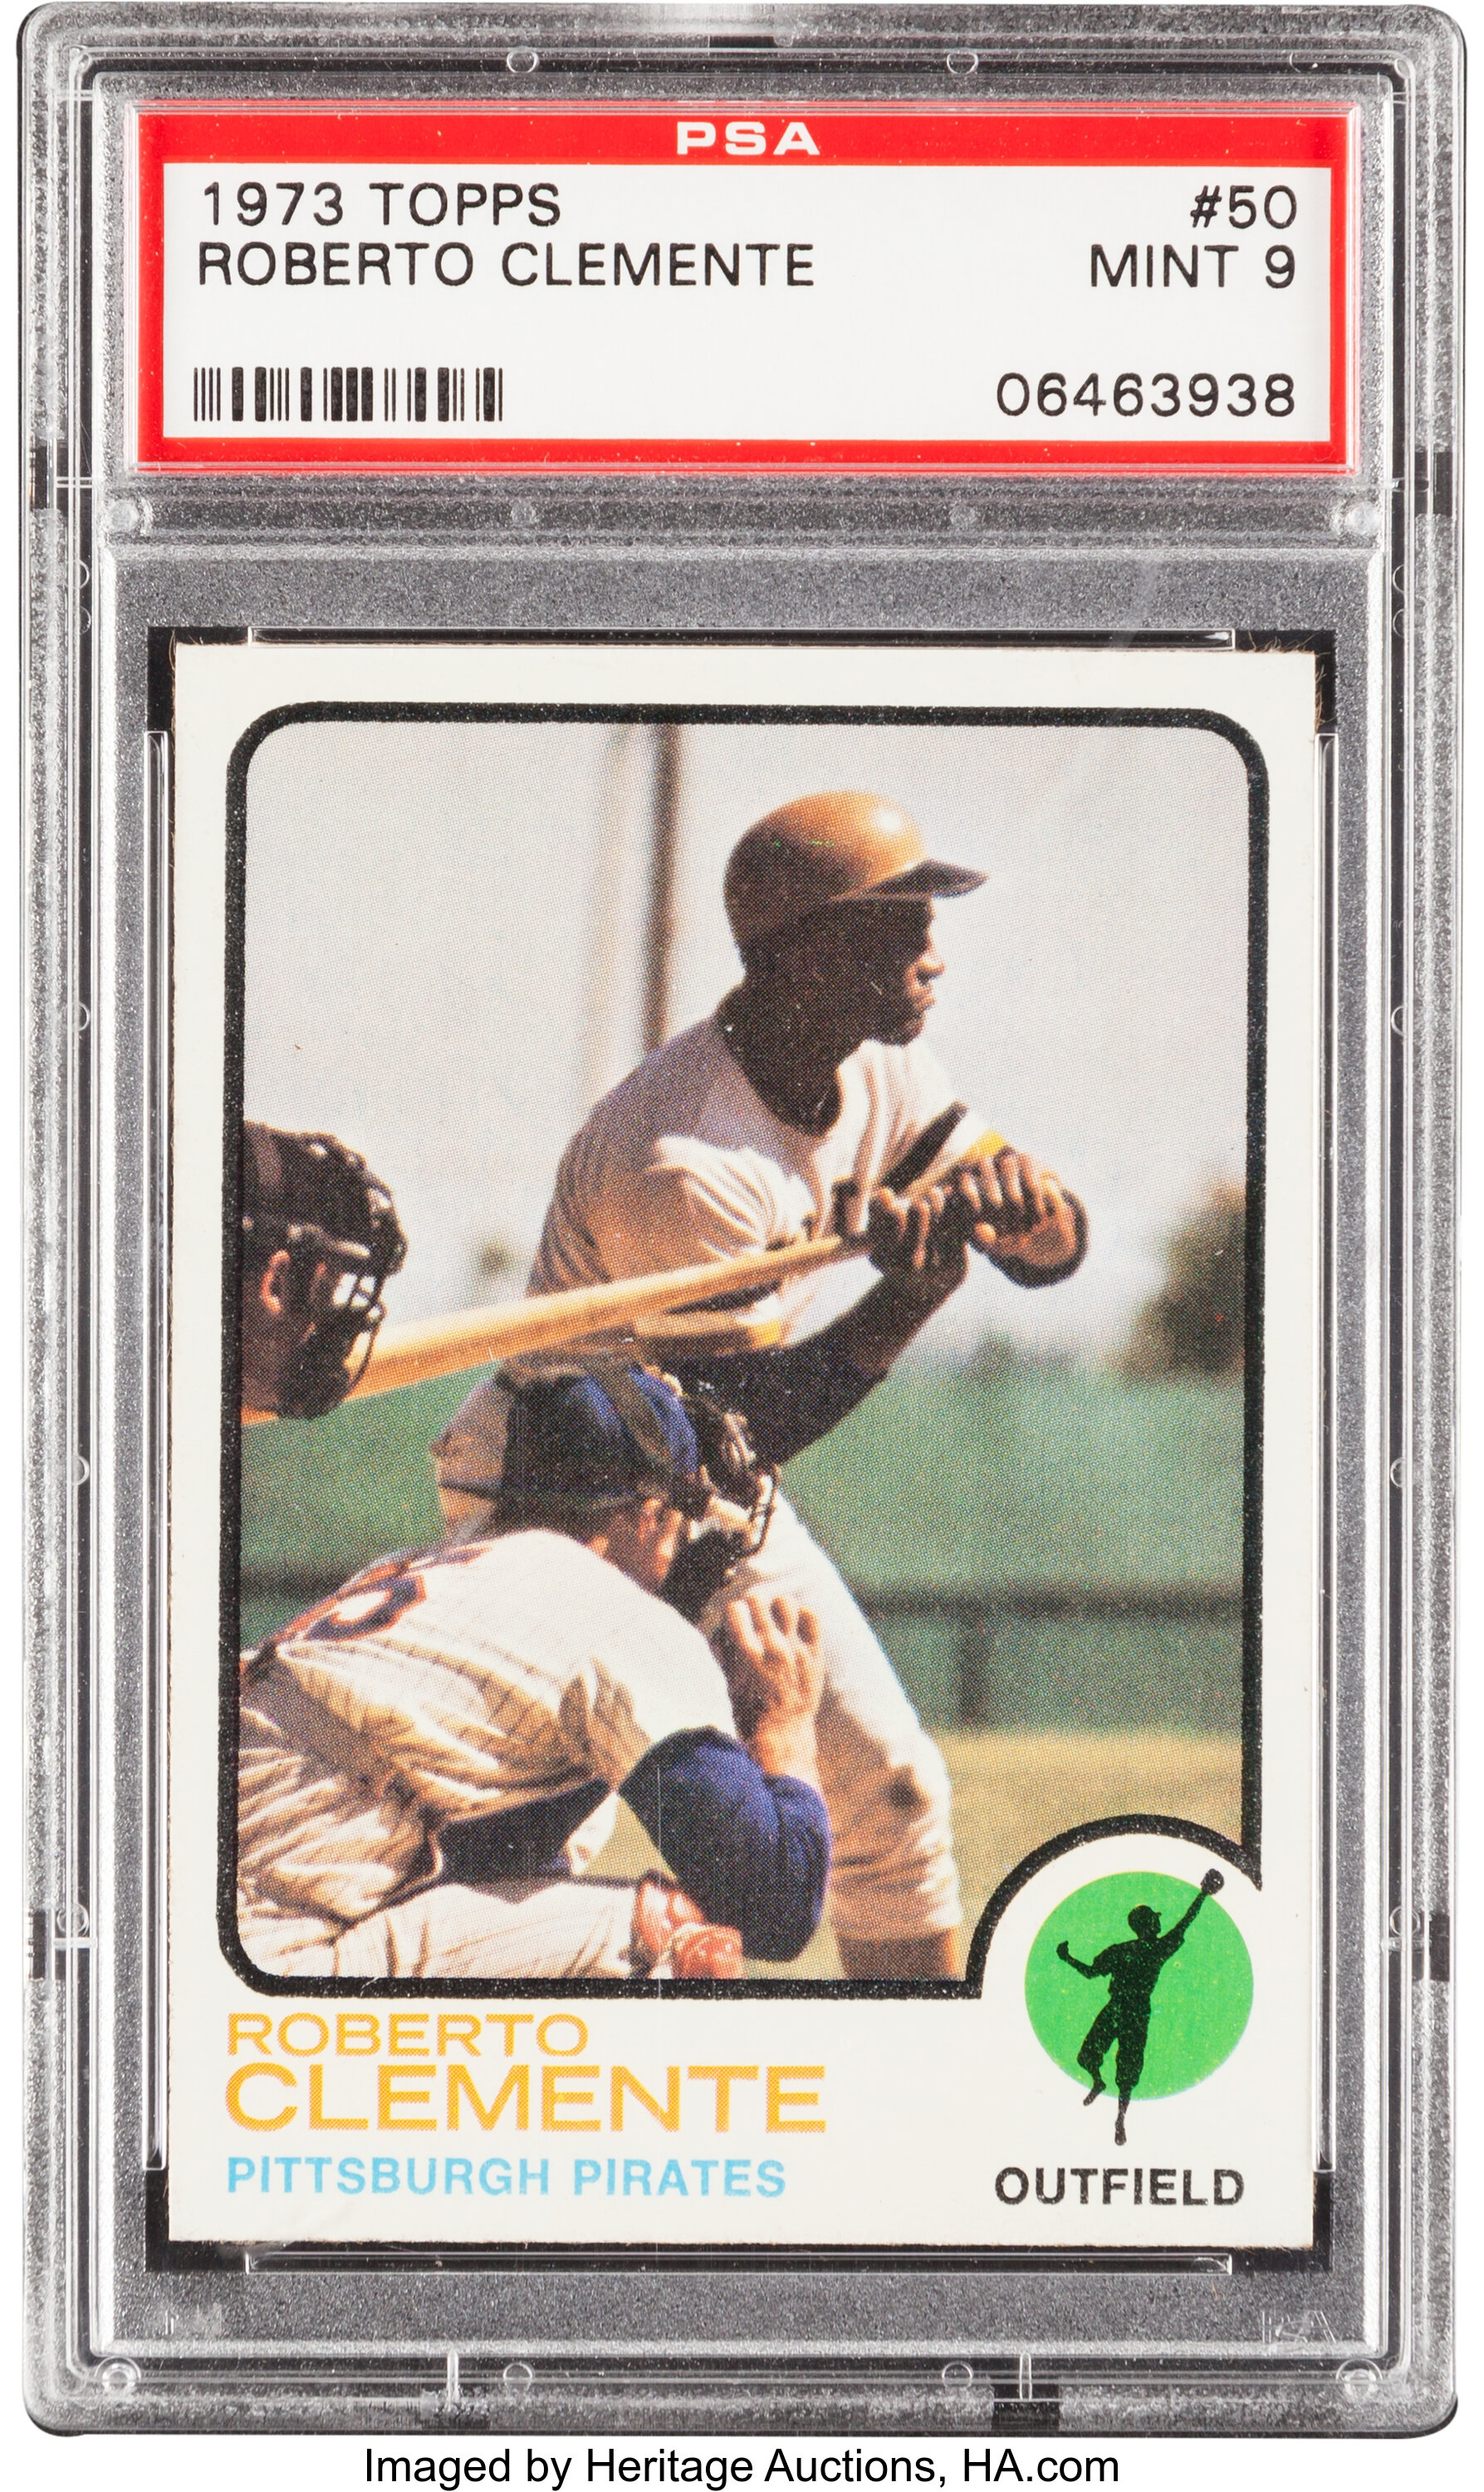 Topps Hall of Fame Gallery roberto clemente Values - MAVIN